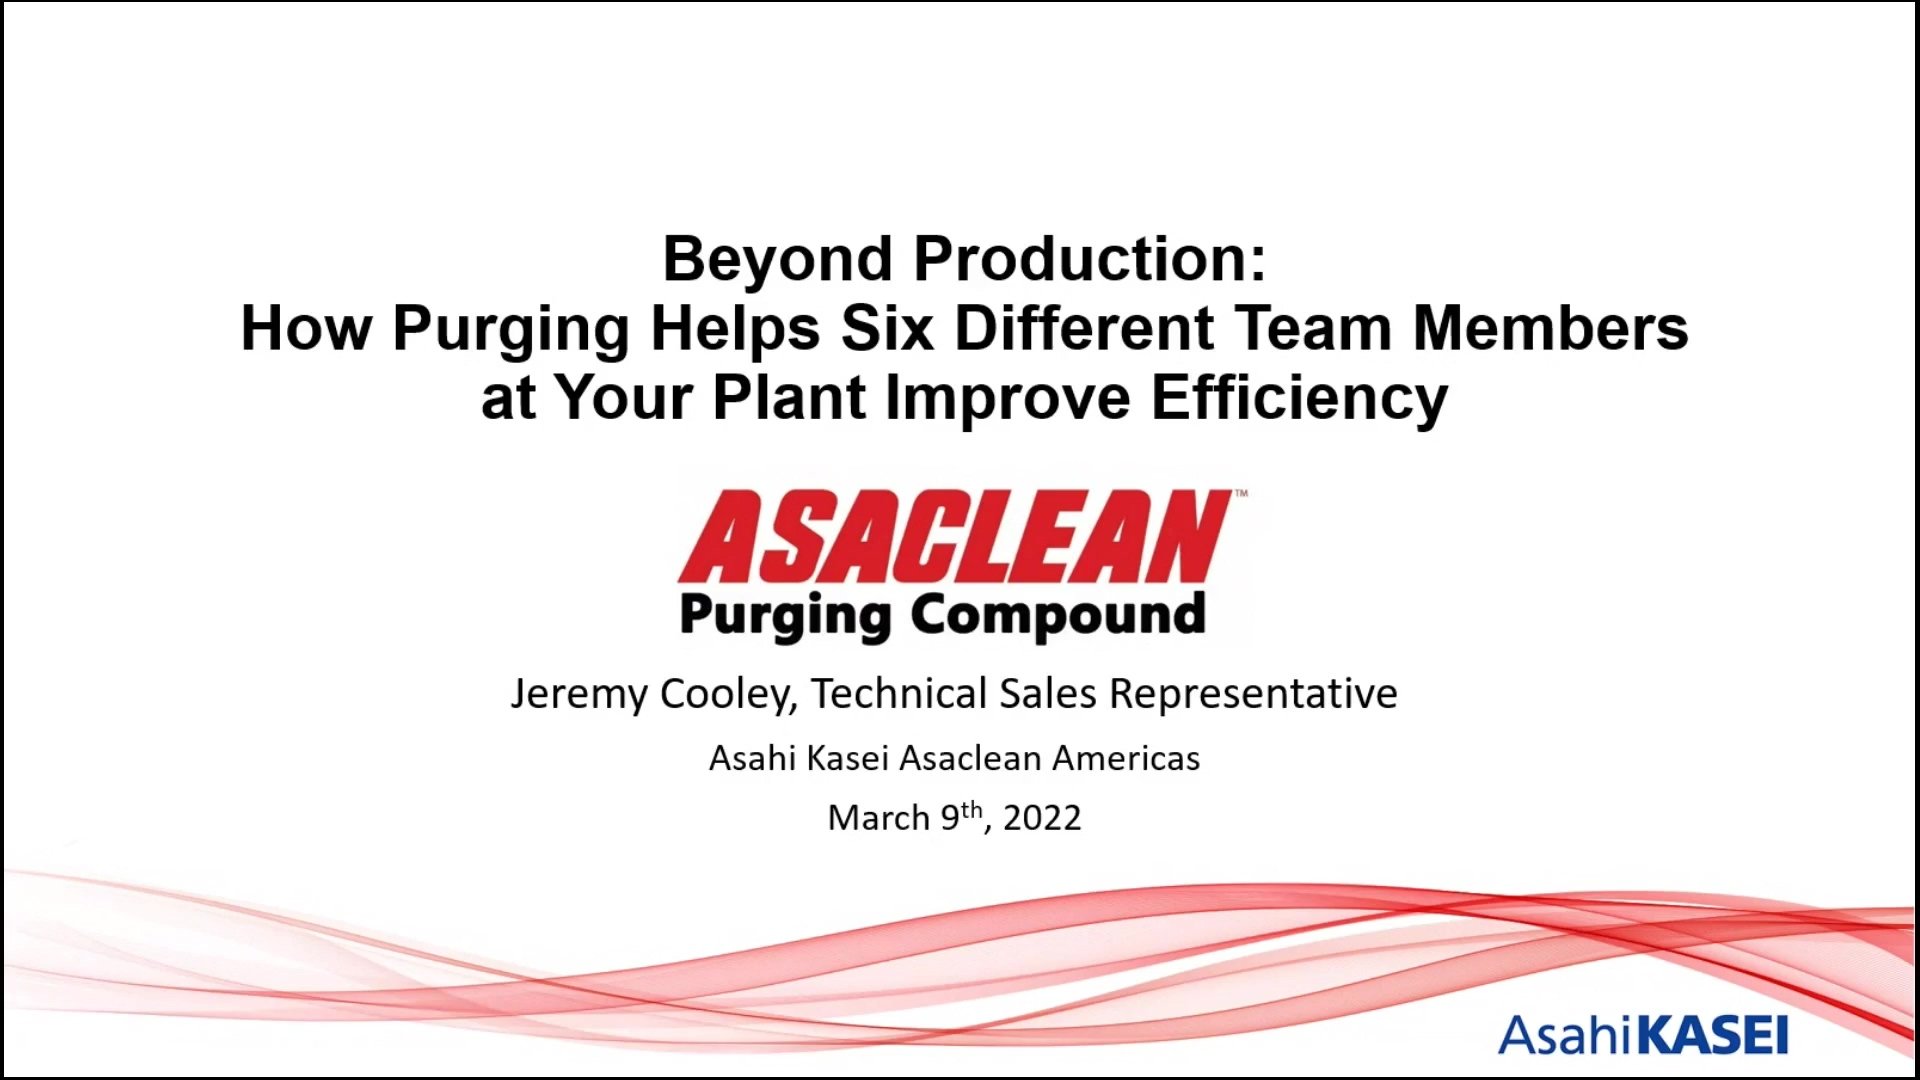 Beyond Production: How Purging Helps Your Plant Improve Efficiency